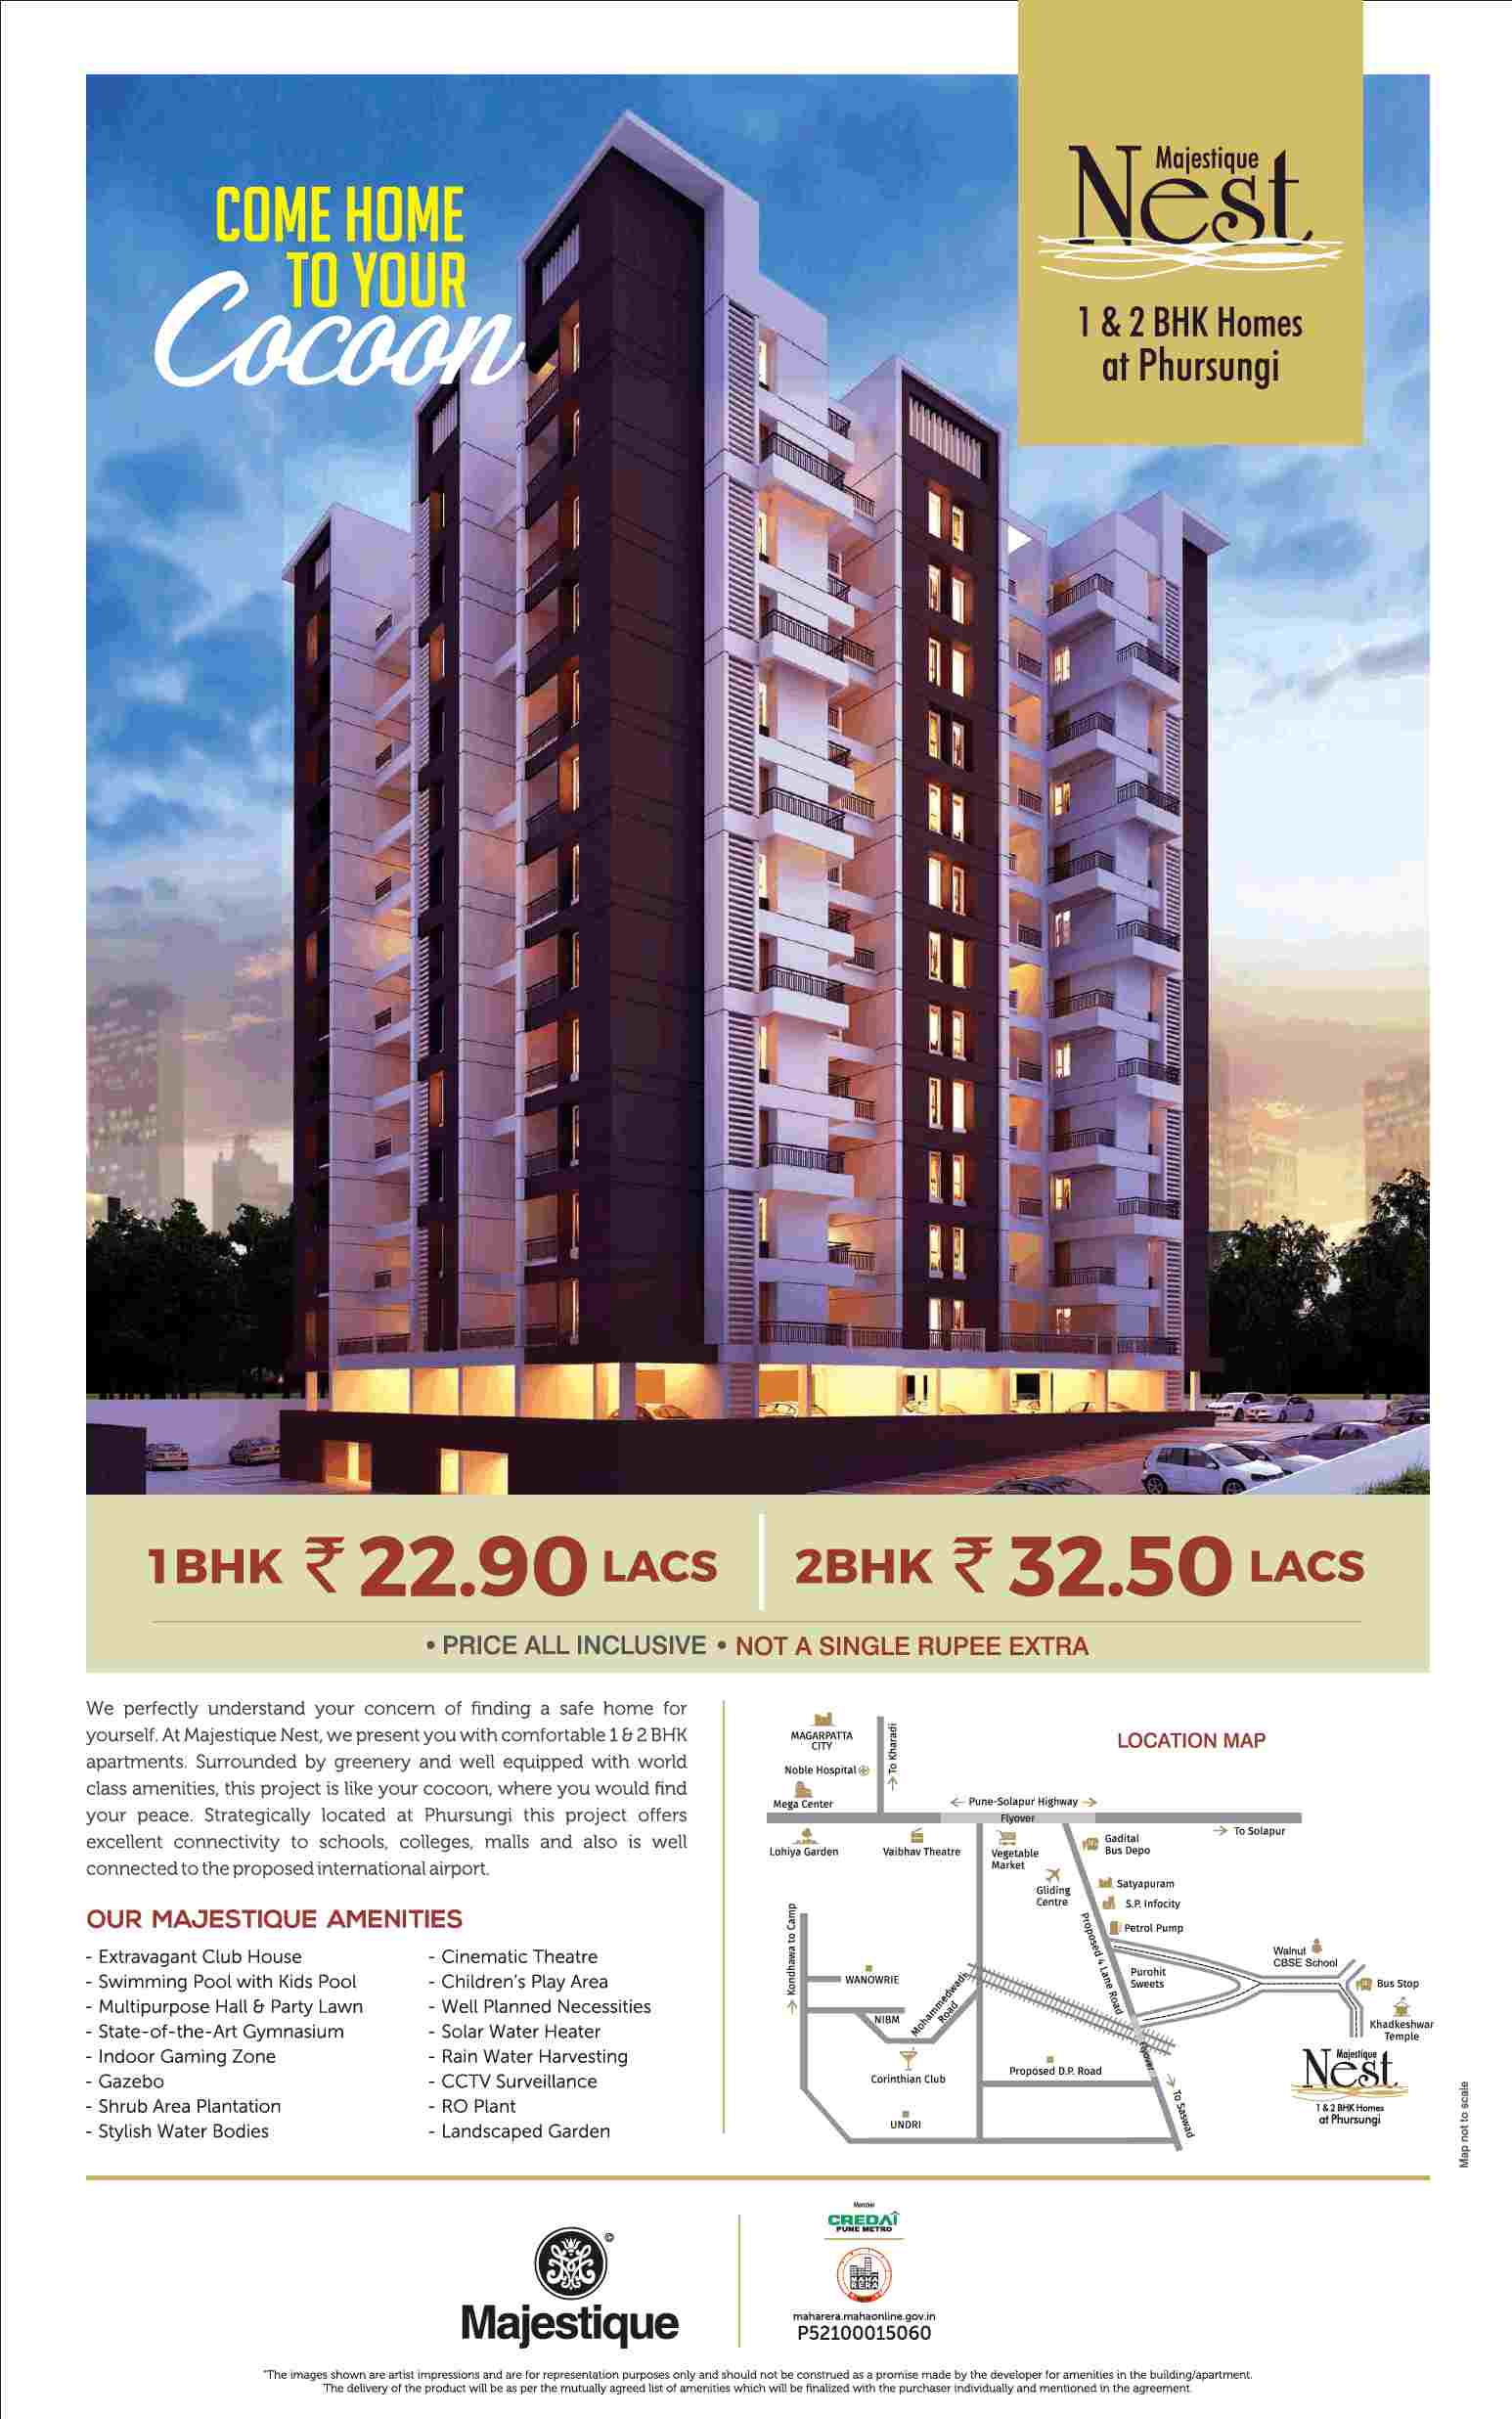 Book a safe home for your family at Majestique Nest in Pune Update